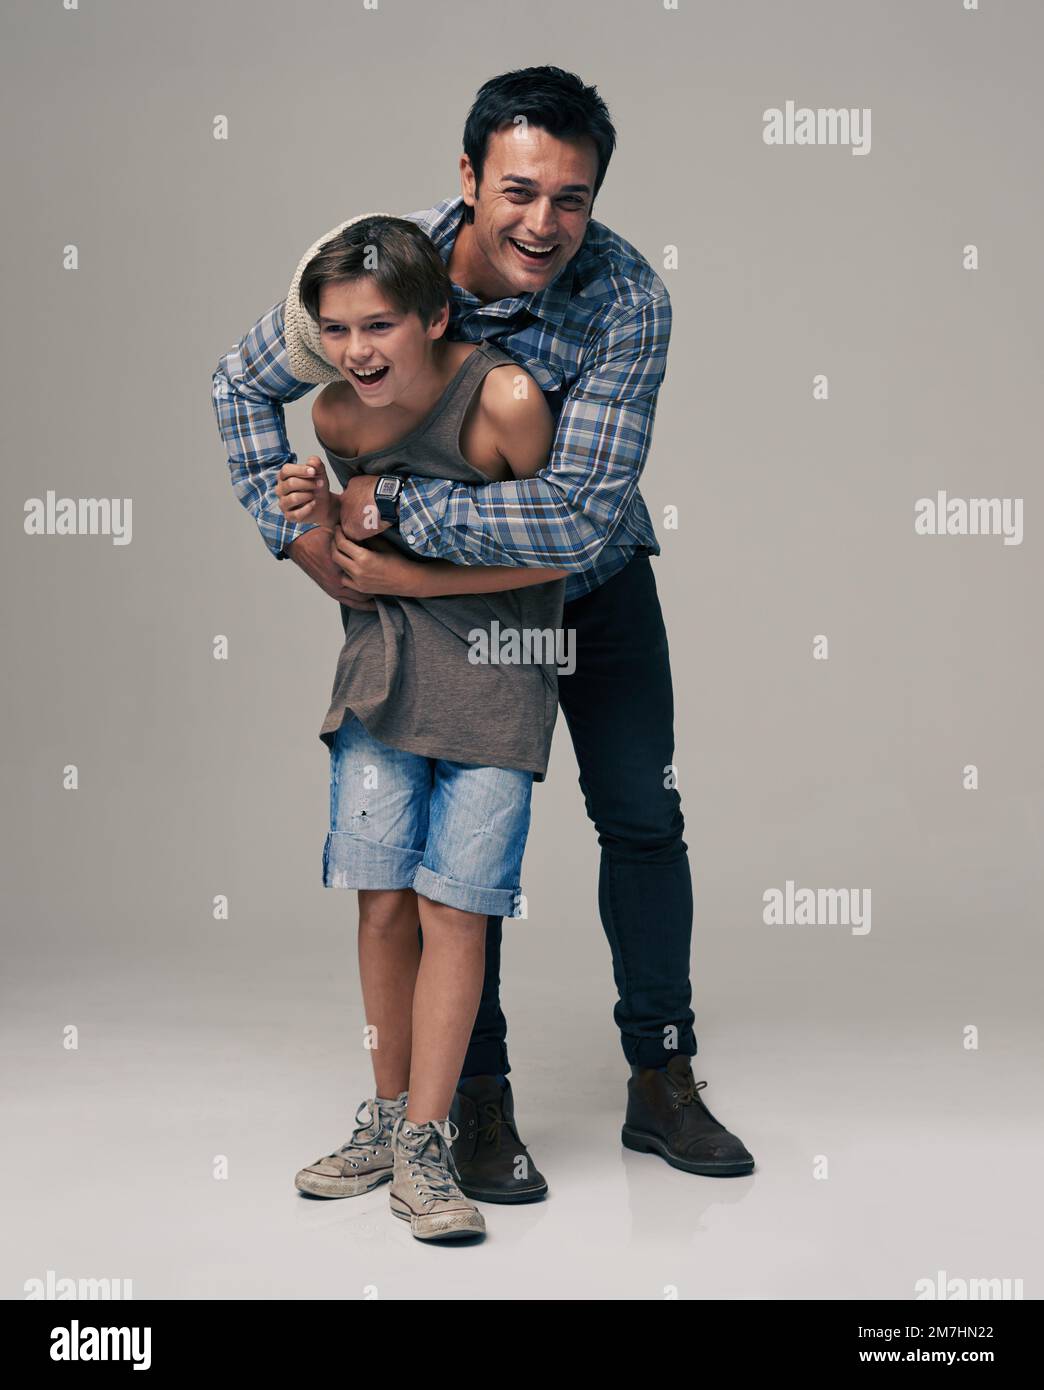 My dad is one of the dudes. Studio shot of a trendy father and son against a gray background. Stock Photo